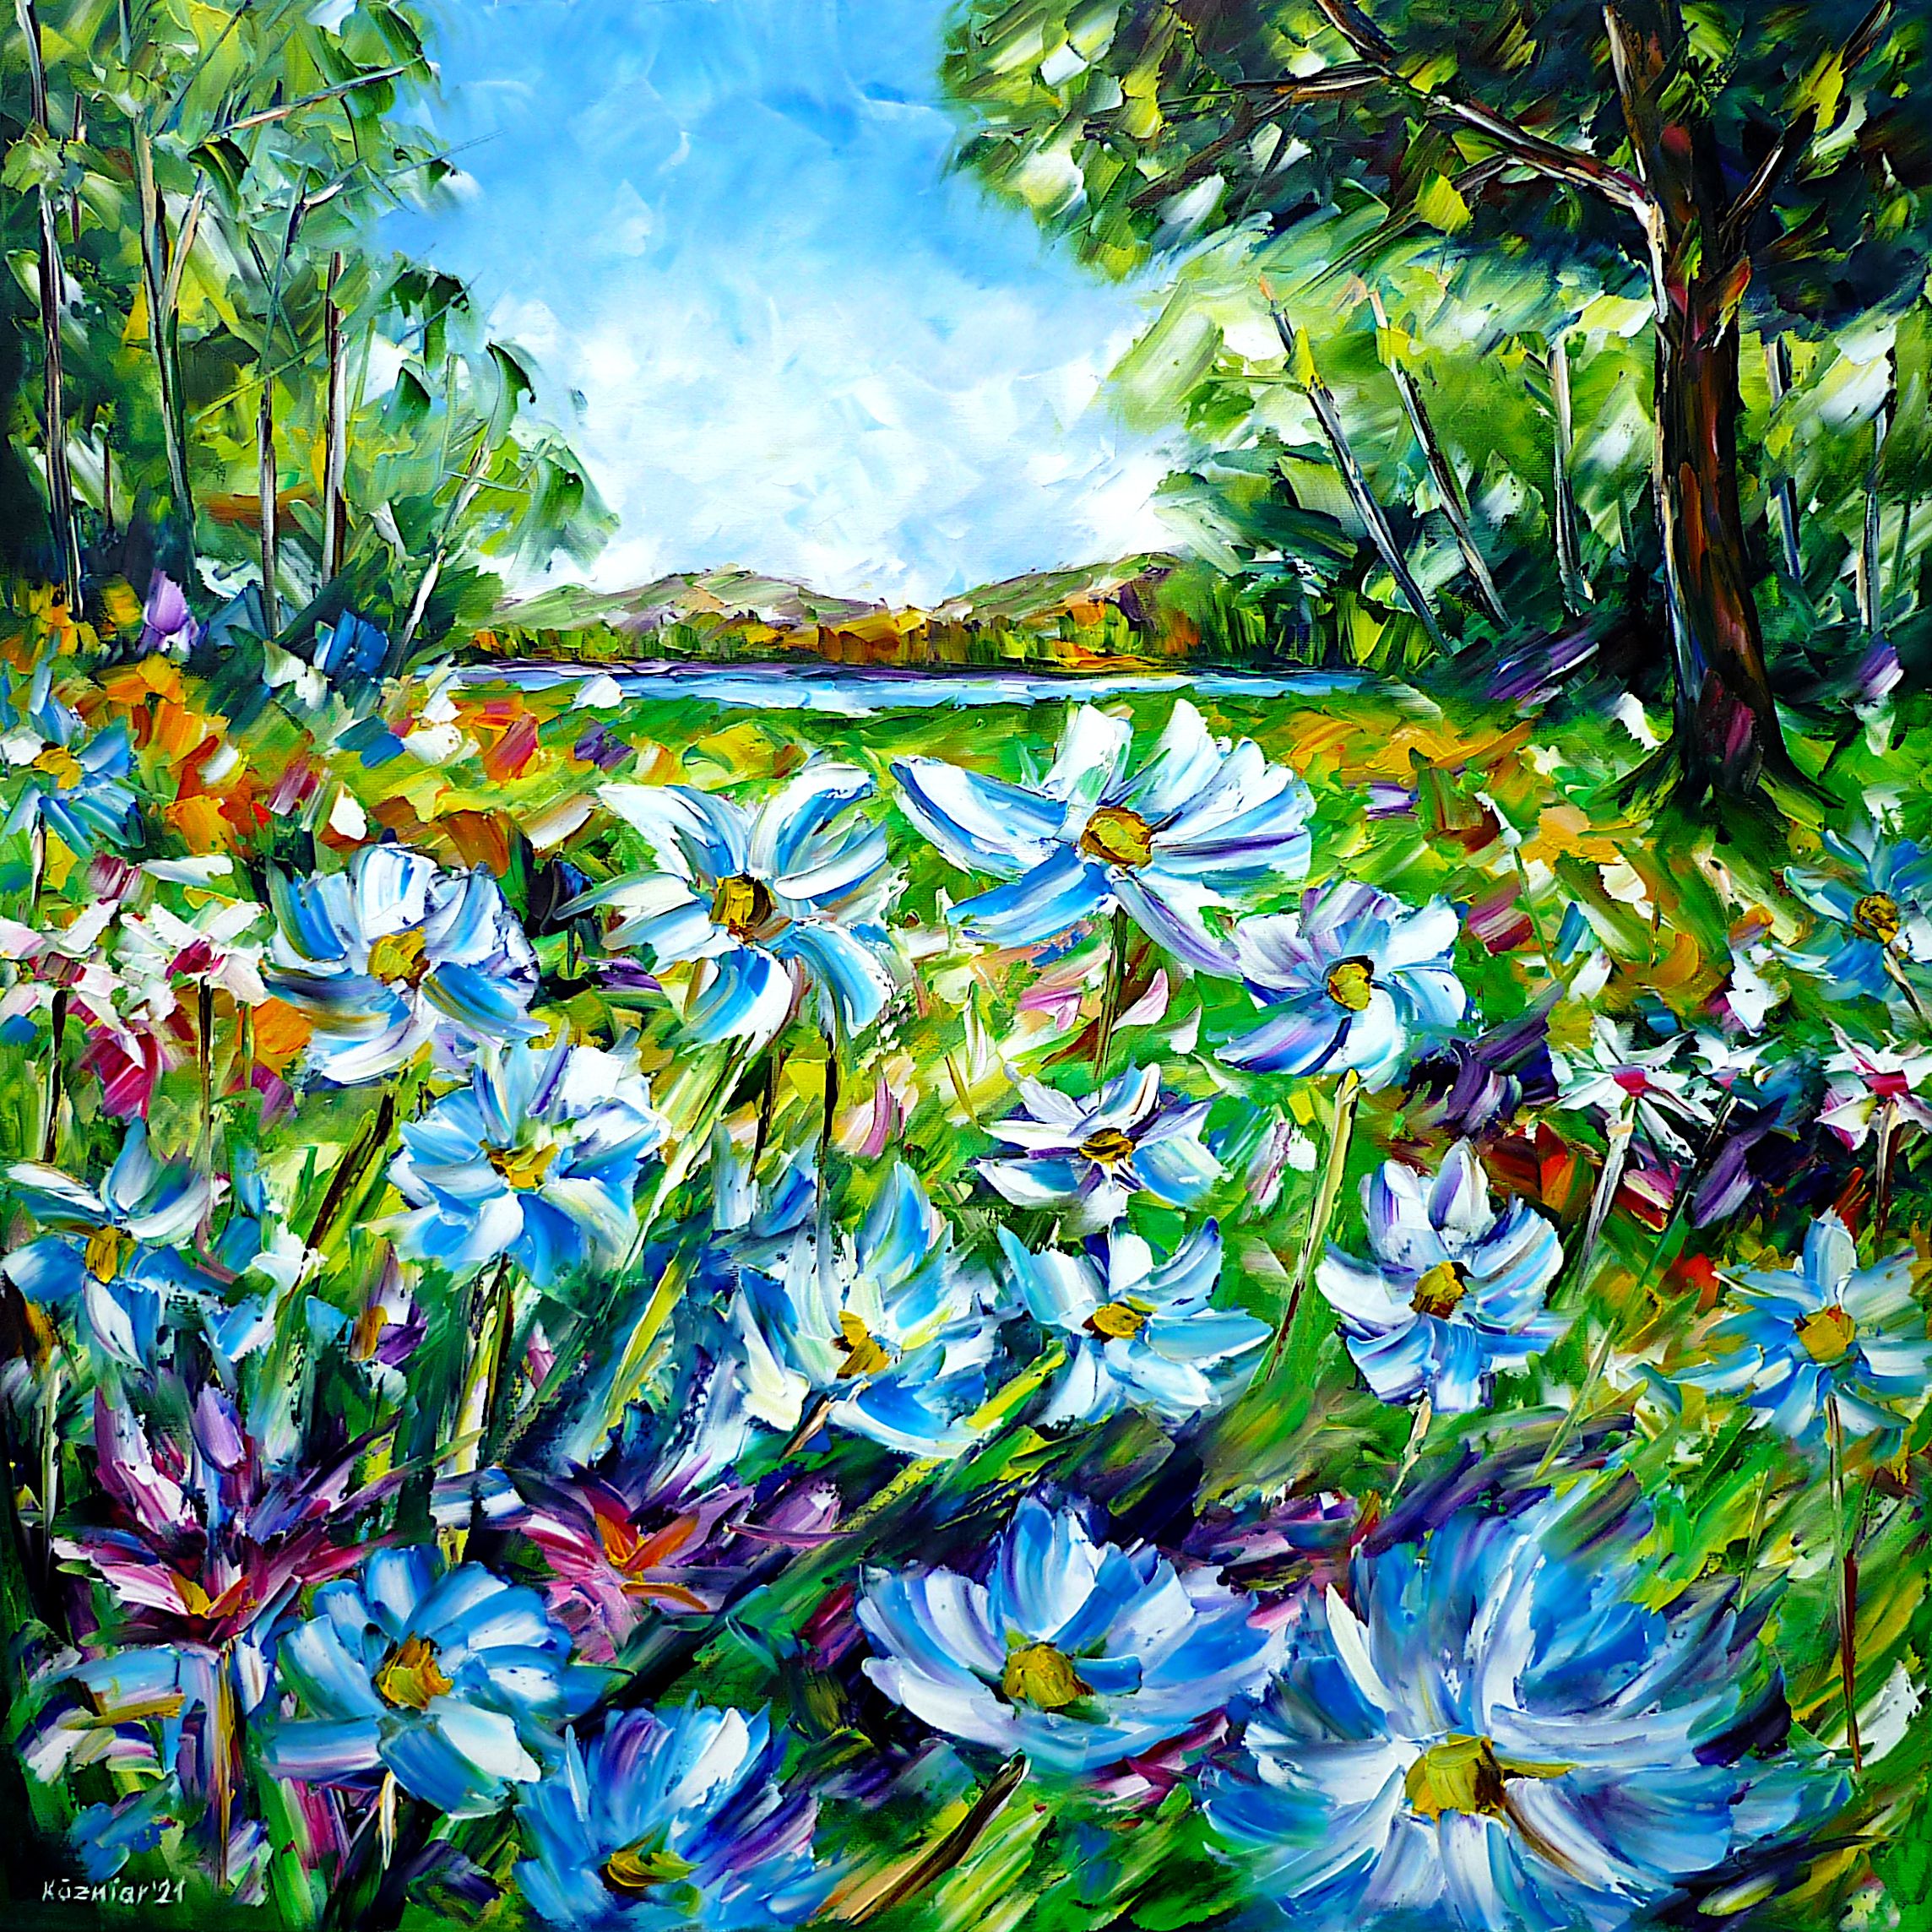 wild flowers,field flowers,summer meadow,summer painting,summer picture,summer landscape,summer colors,spring colors,green meadow,summer feelings,landscape painting,landscape picture,flowers on the meadow,meadow flowers,square format,square painting,square picture,blue-green picture,blue-green painting,joy,friendly picture,friendly painting,peace,peaceful picture,peaceful painting,palette knife oil painting,modernart,impressionism,expressionism,figurative,abstract painting,lively colours,colorful painting,bright colors,light reflections,impasto painting,living room art,living room picture,living room painting